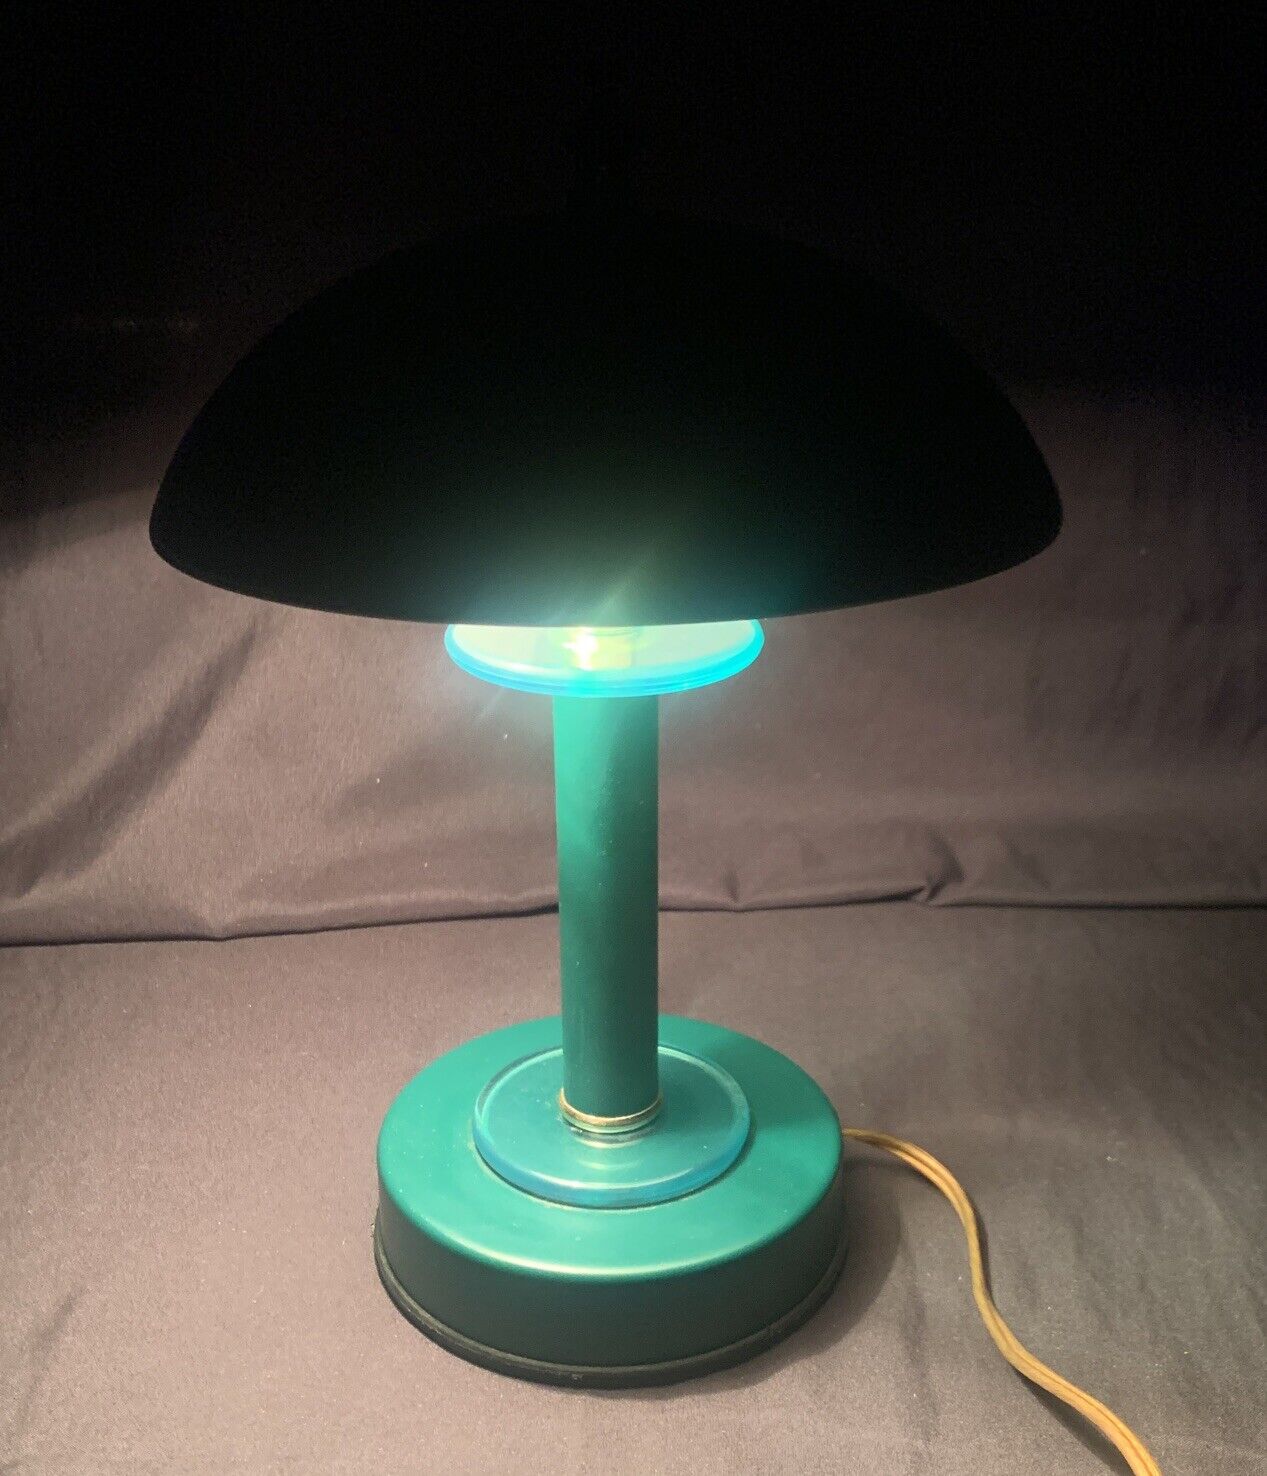 🛸Vintage 12” MCM Space Age Dome Mushroom Touch Lamp Green UFO Flying Saucer🛸